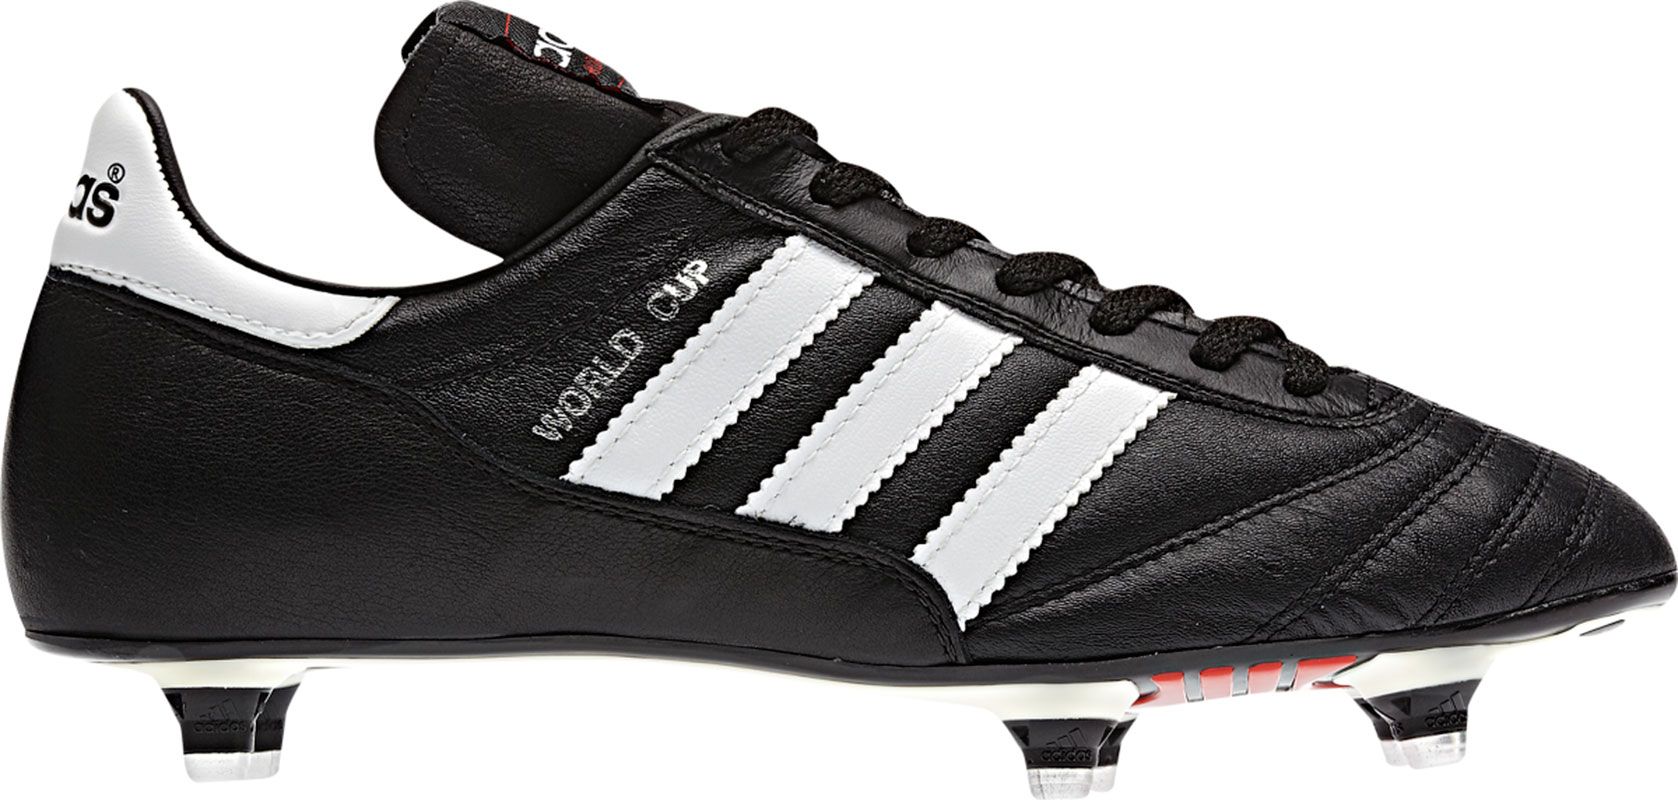 adidas Men's World Cup SG Soccer Cleat